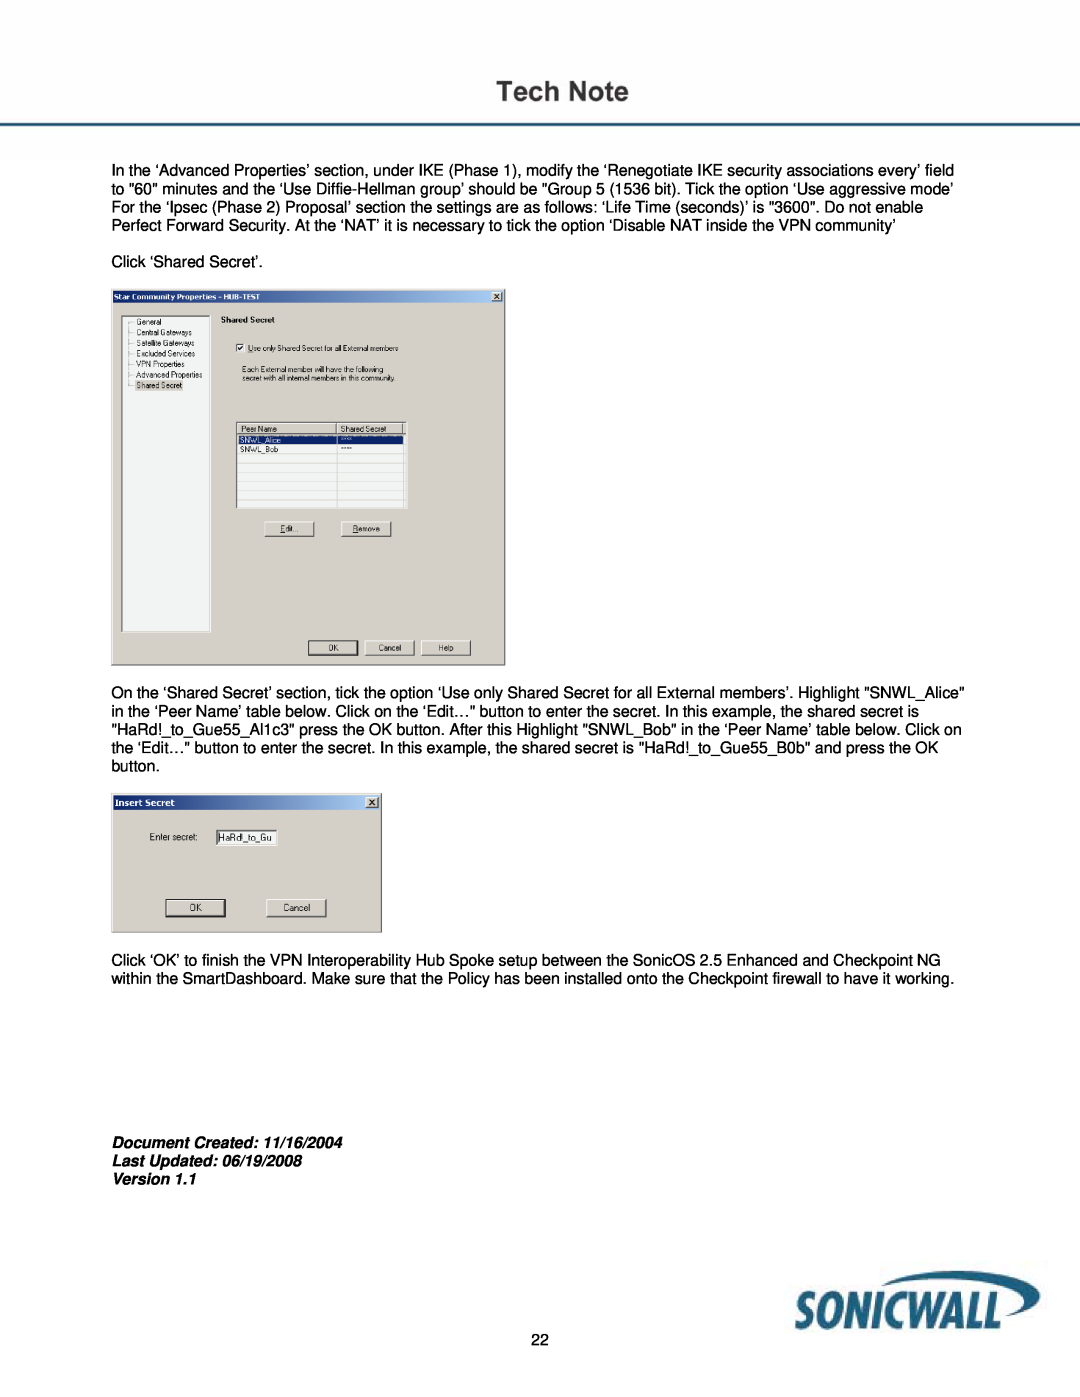 SonicWALL TZ170 manual Document Created 11/16/2004 Last Updated 06/19/2008 Version 